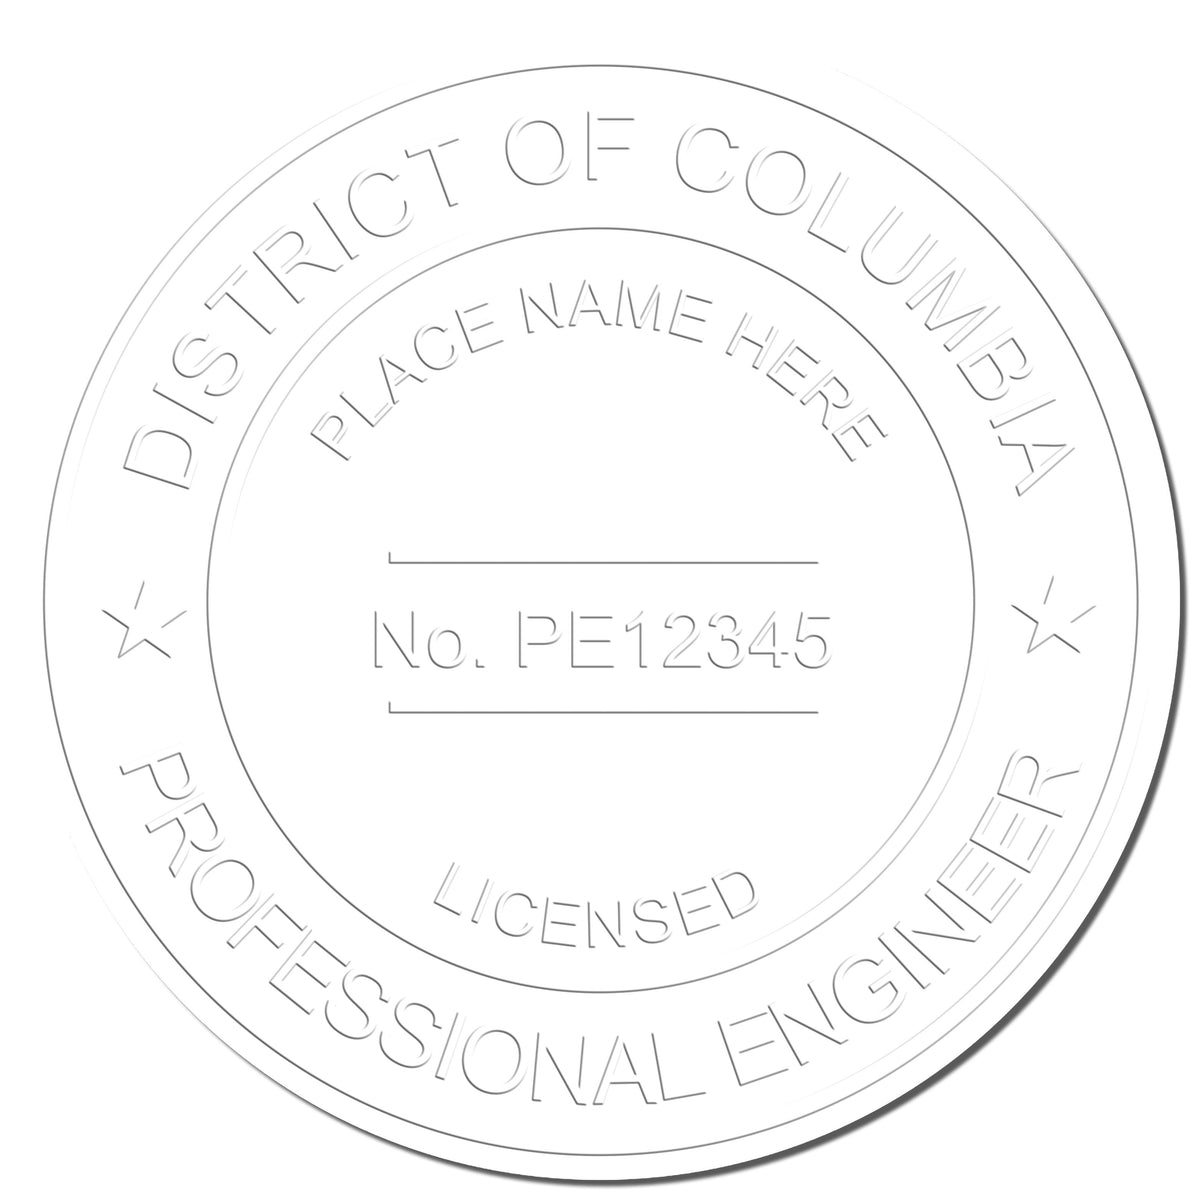 Another Example of a stamped impression of the District of Columbia Engineer Desk Seal on a piece of office paper.